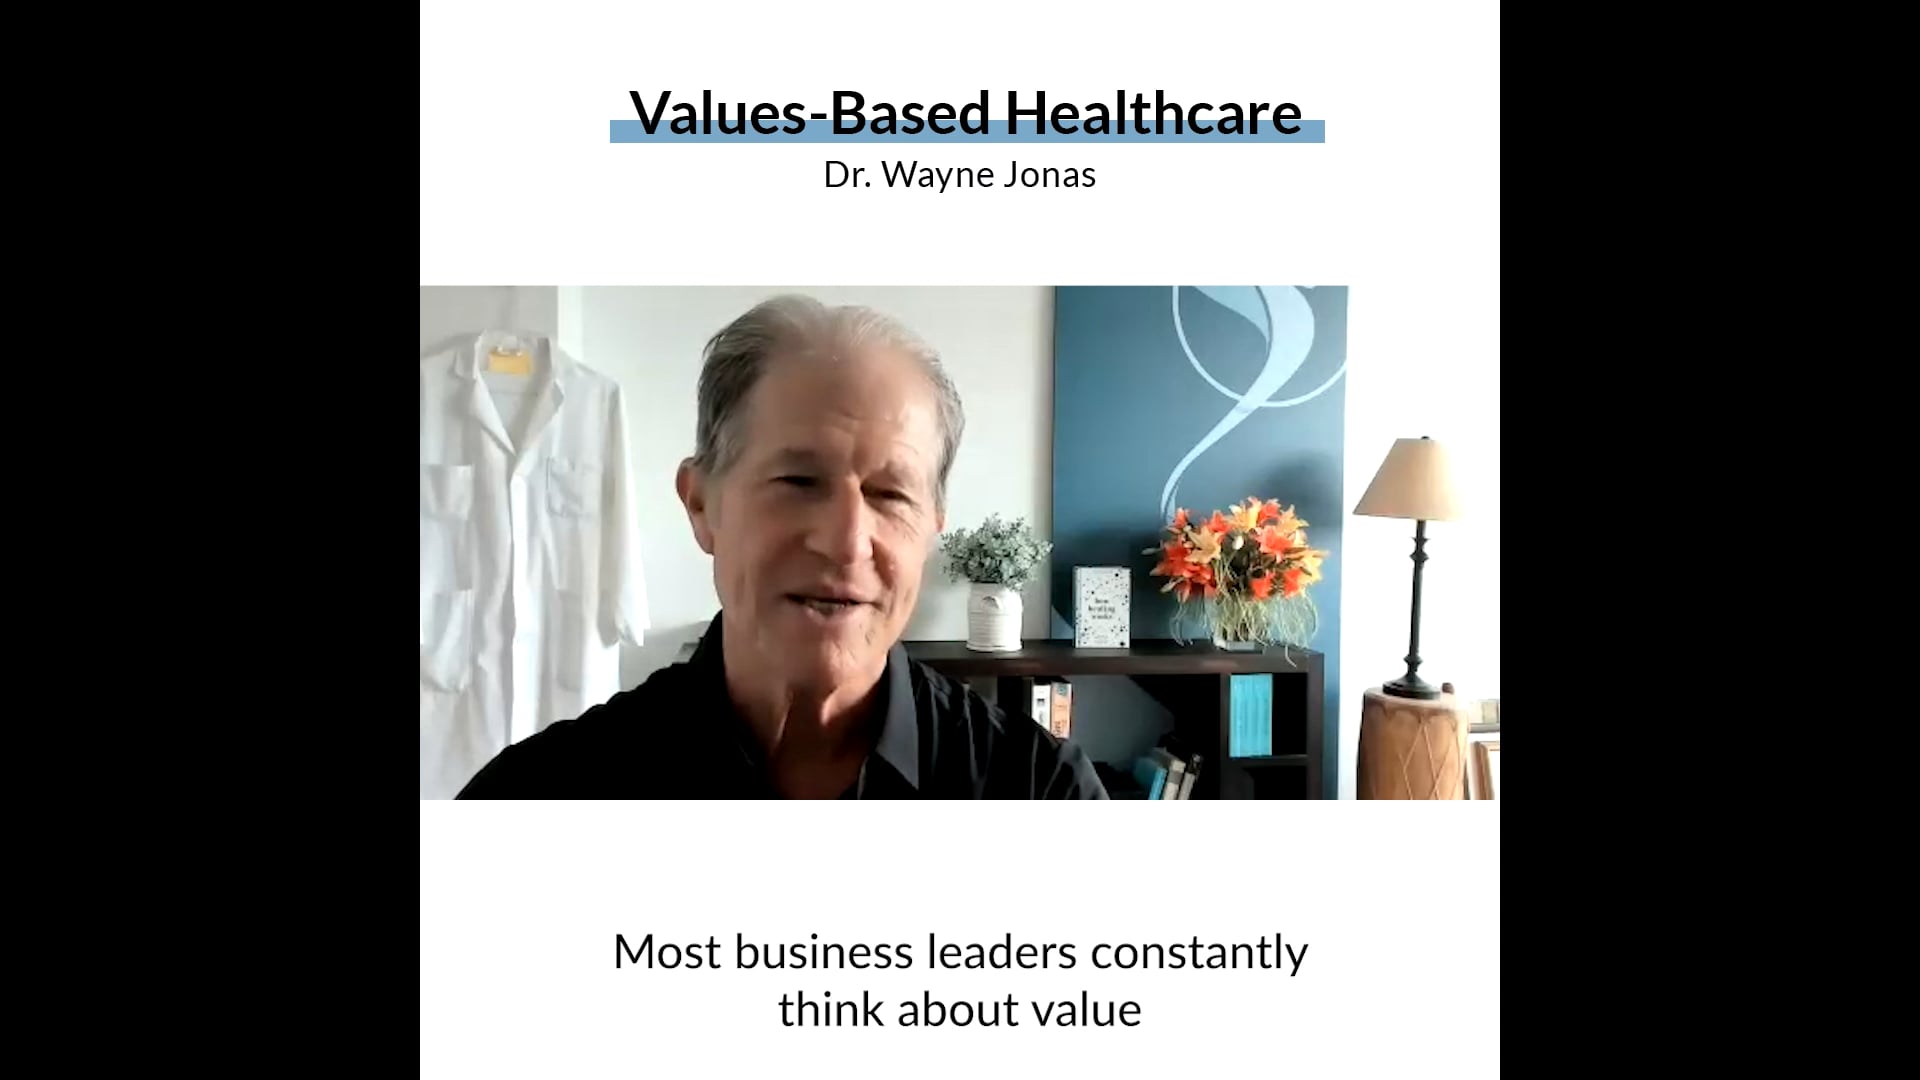 Values-Based Healthcare